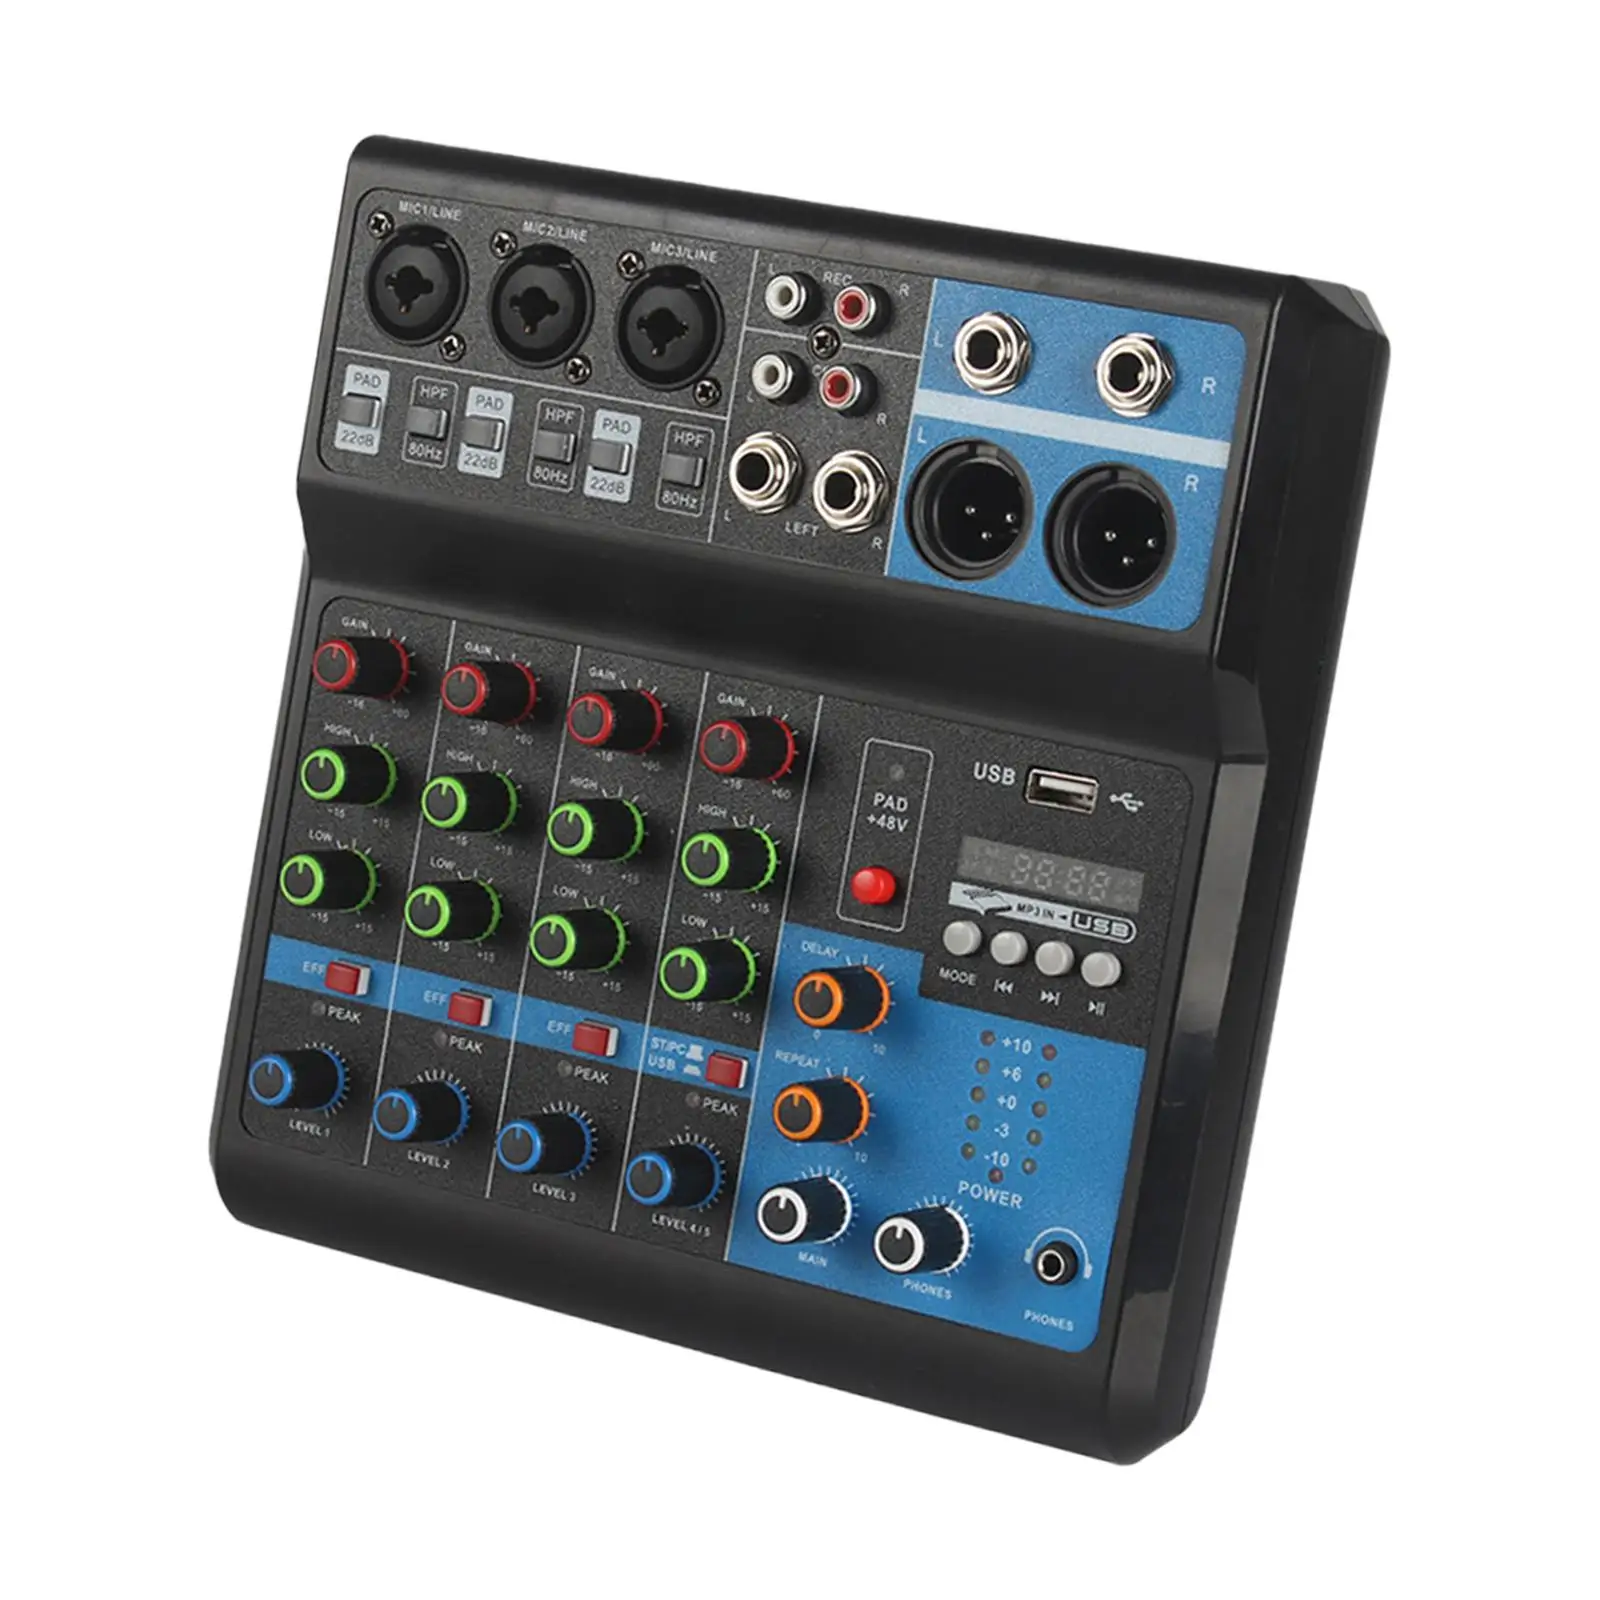 DJ Mixing Board 5 Channel Mixer Audio Mixer US 110V Built in Reverb Effect Stable Transmission Measure 8x8x2.6inch for Karaoke